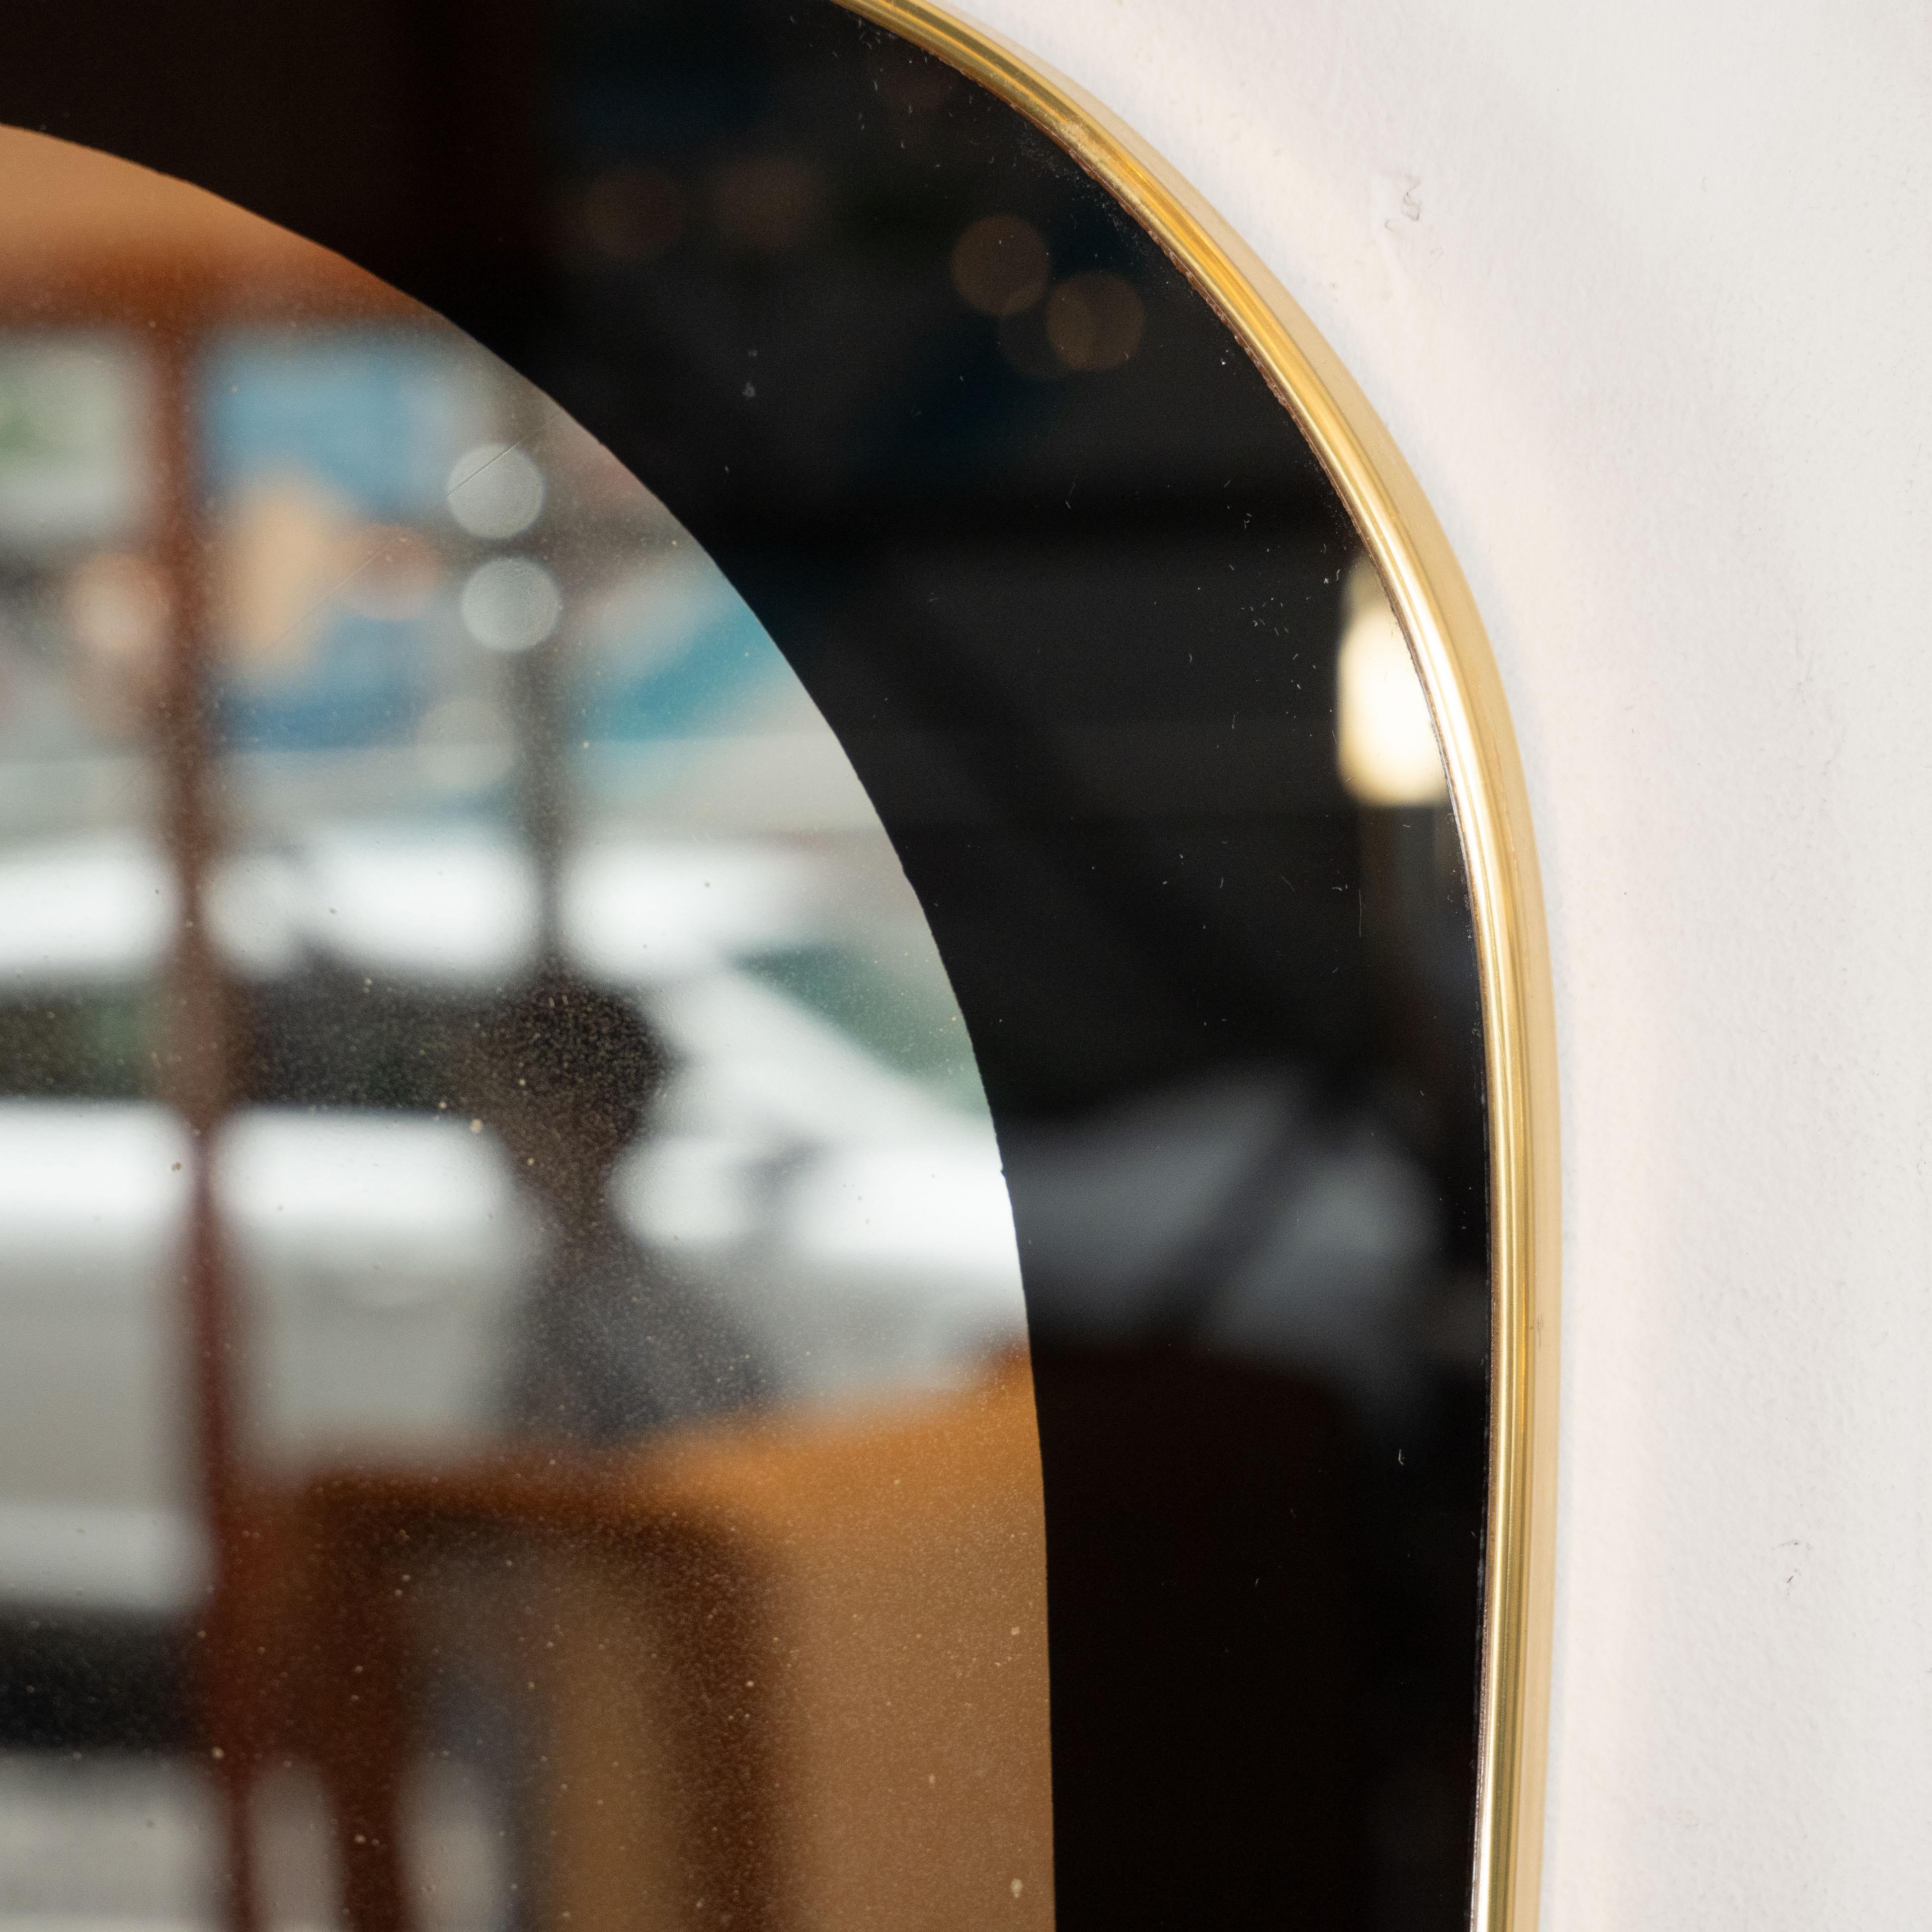 This stunning and sophisticated wall mirror was realized in Italy, circa 1970. It features an atomic oval form wrapped in brass. The center of the mirror is clear while the borders have been reverse églomisé painted in a rich opaque onyx hue. With